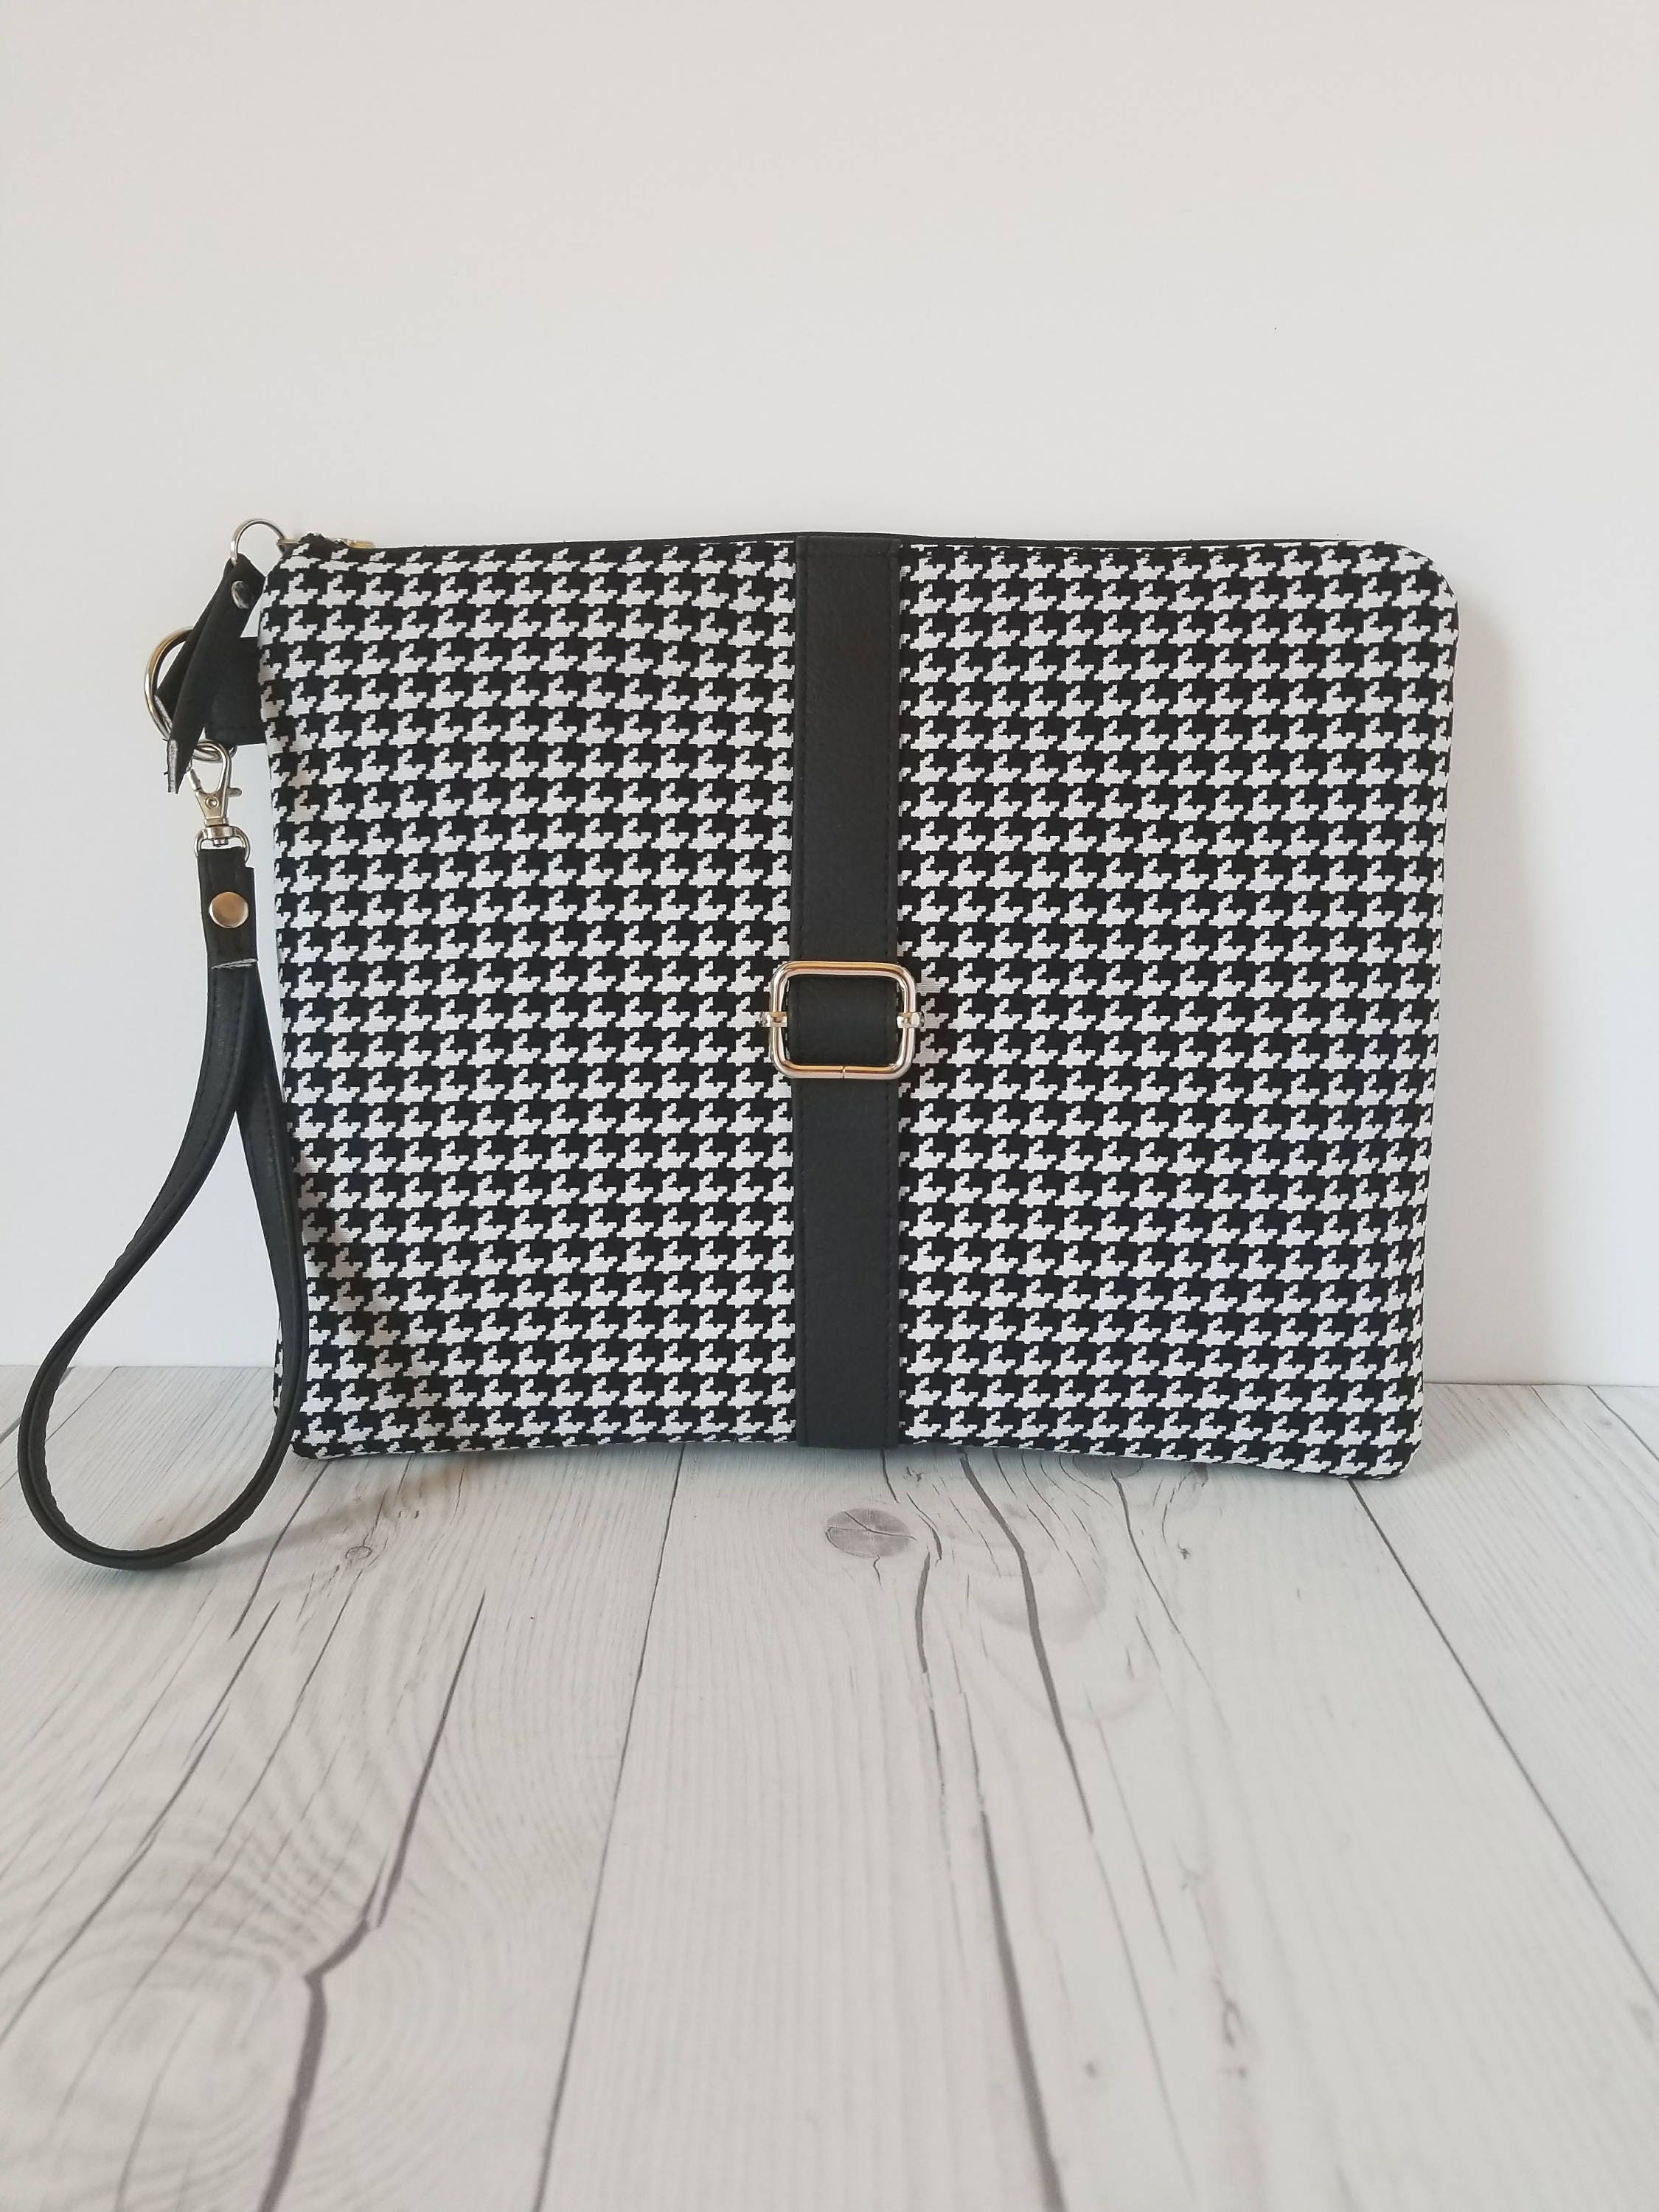 Black White Clutch, Houndstooth Clutch, faux Leather Clutch, Large Clutch, Leather Clutch ...